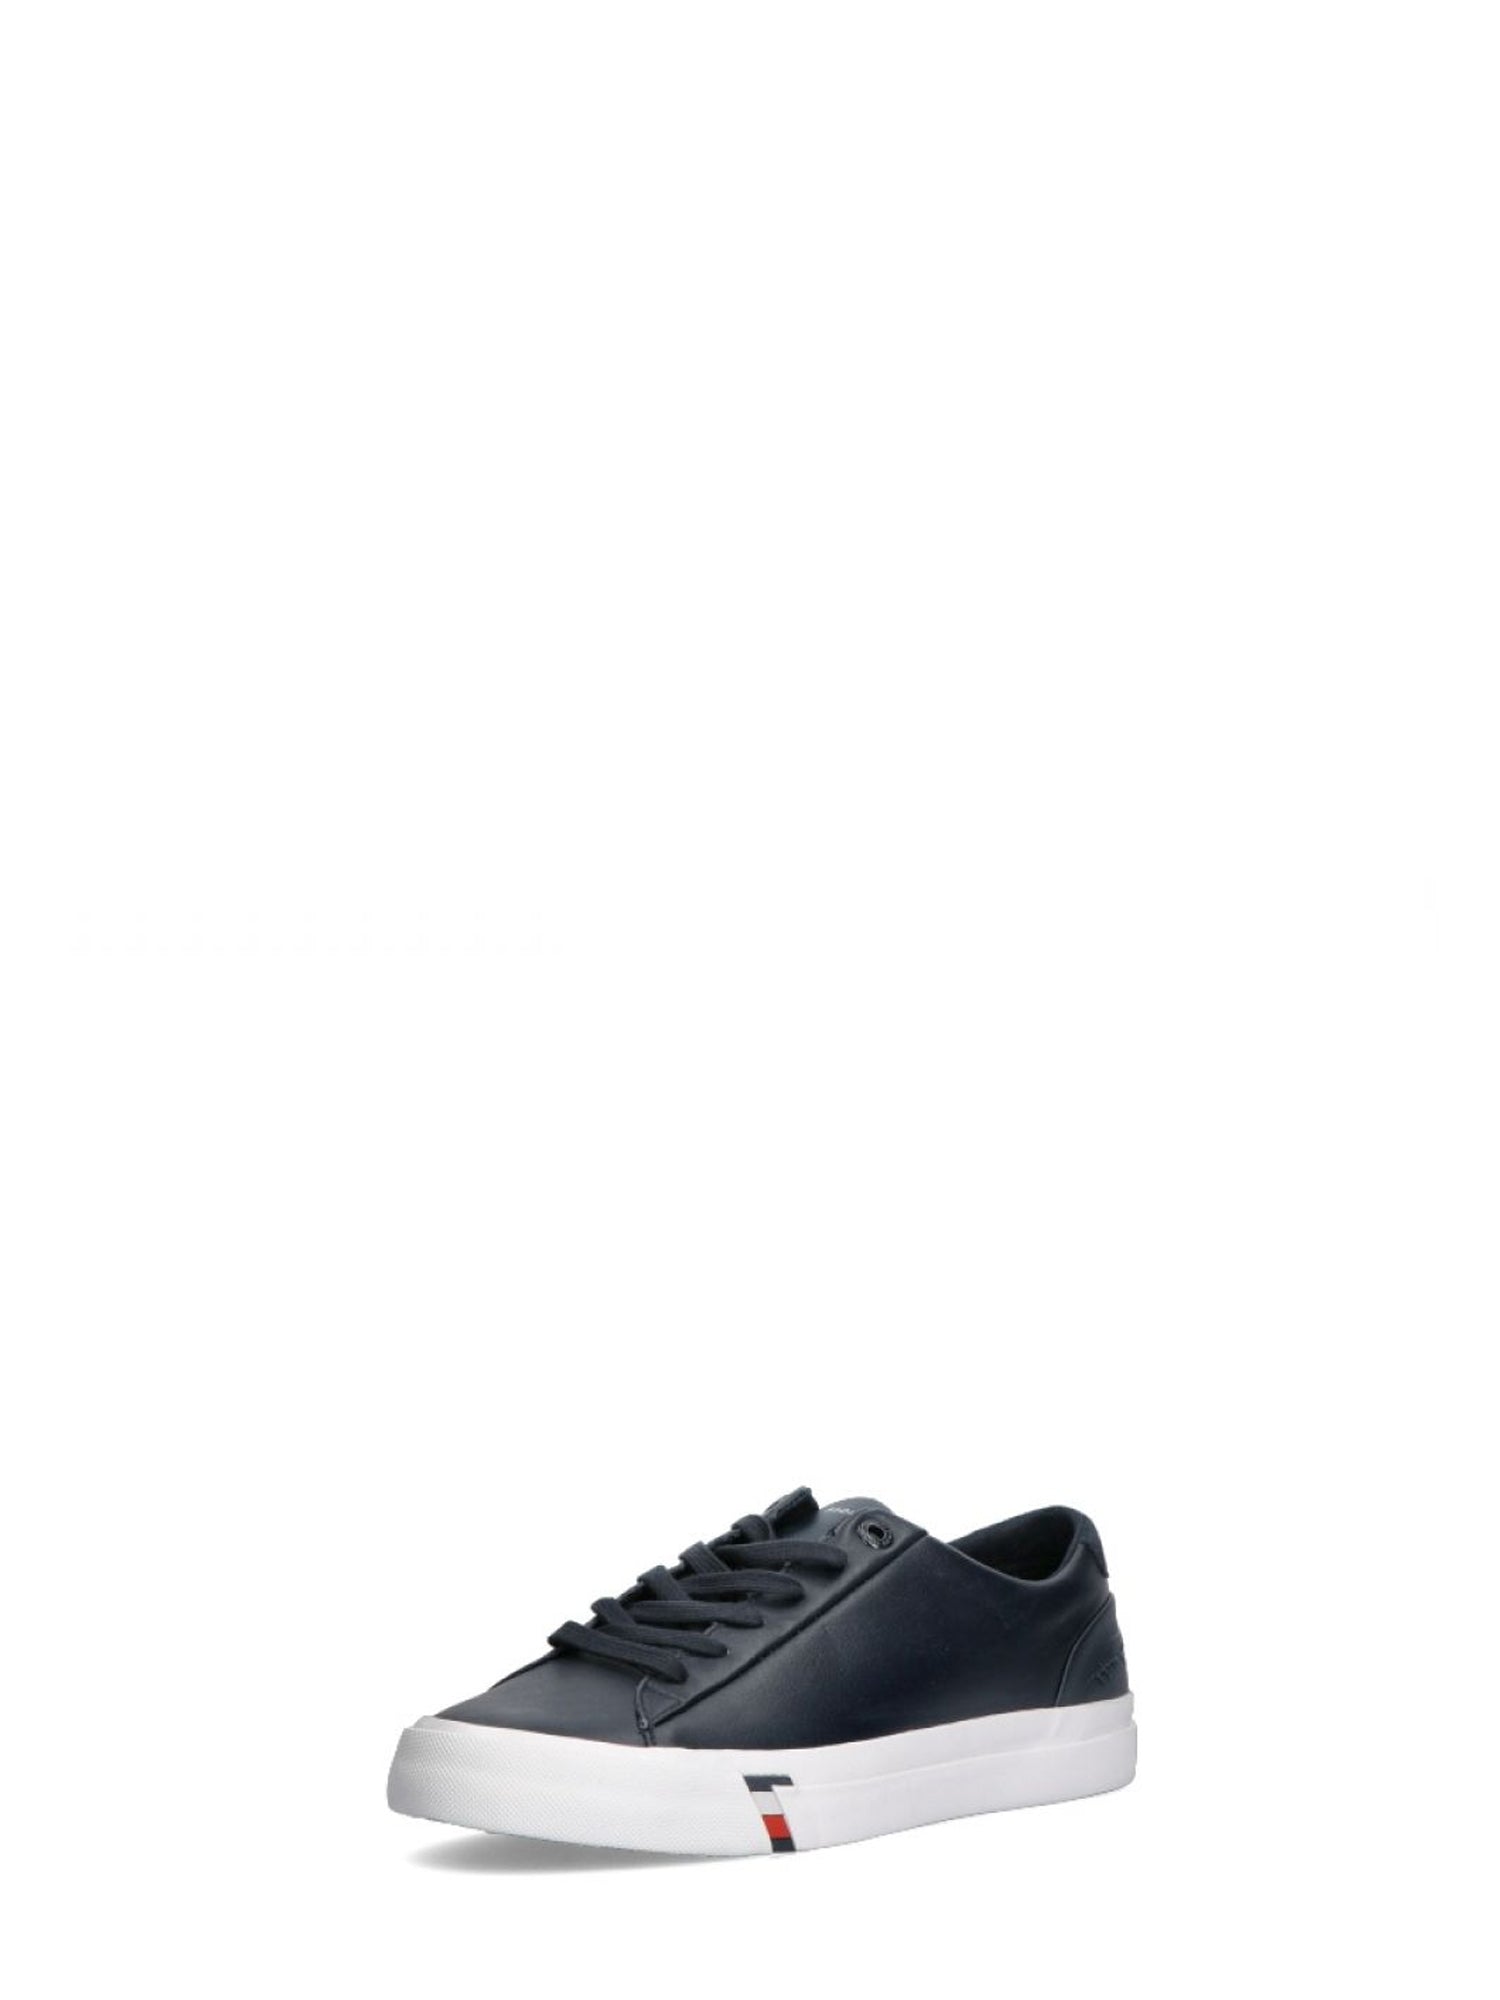 TOMMY HILFIGER SHOES SNEAKERS